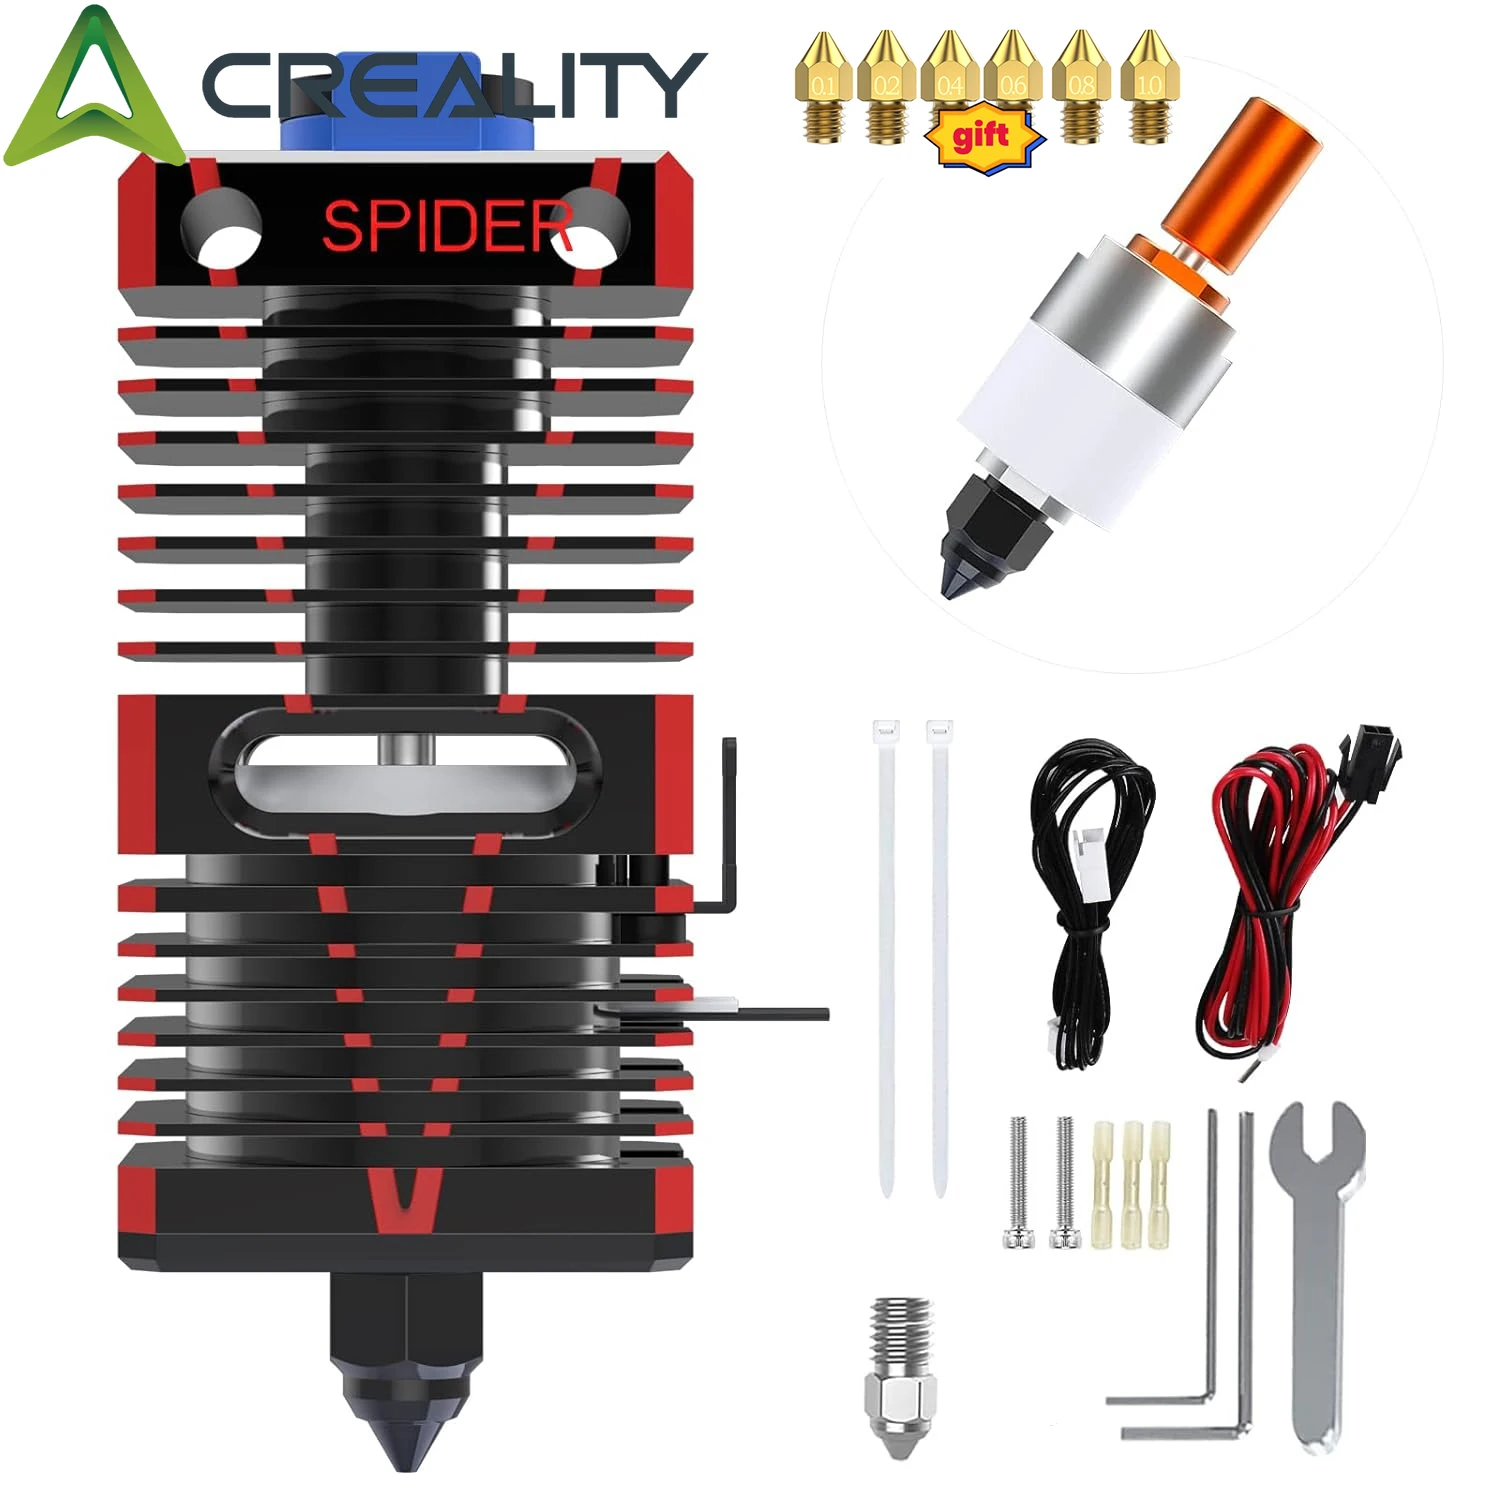 

Creality Official Spider Speedy Ceramic Hotend Kit High-Temp Resistant, Higher Flow, All Metal Hotend Upgraded 3D Printer